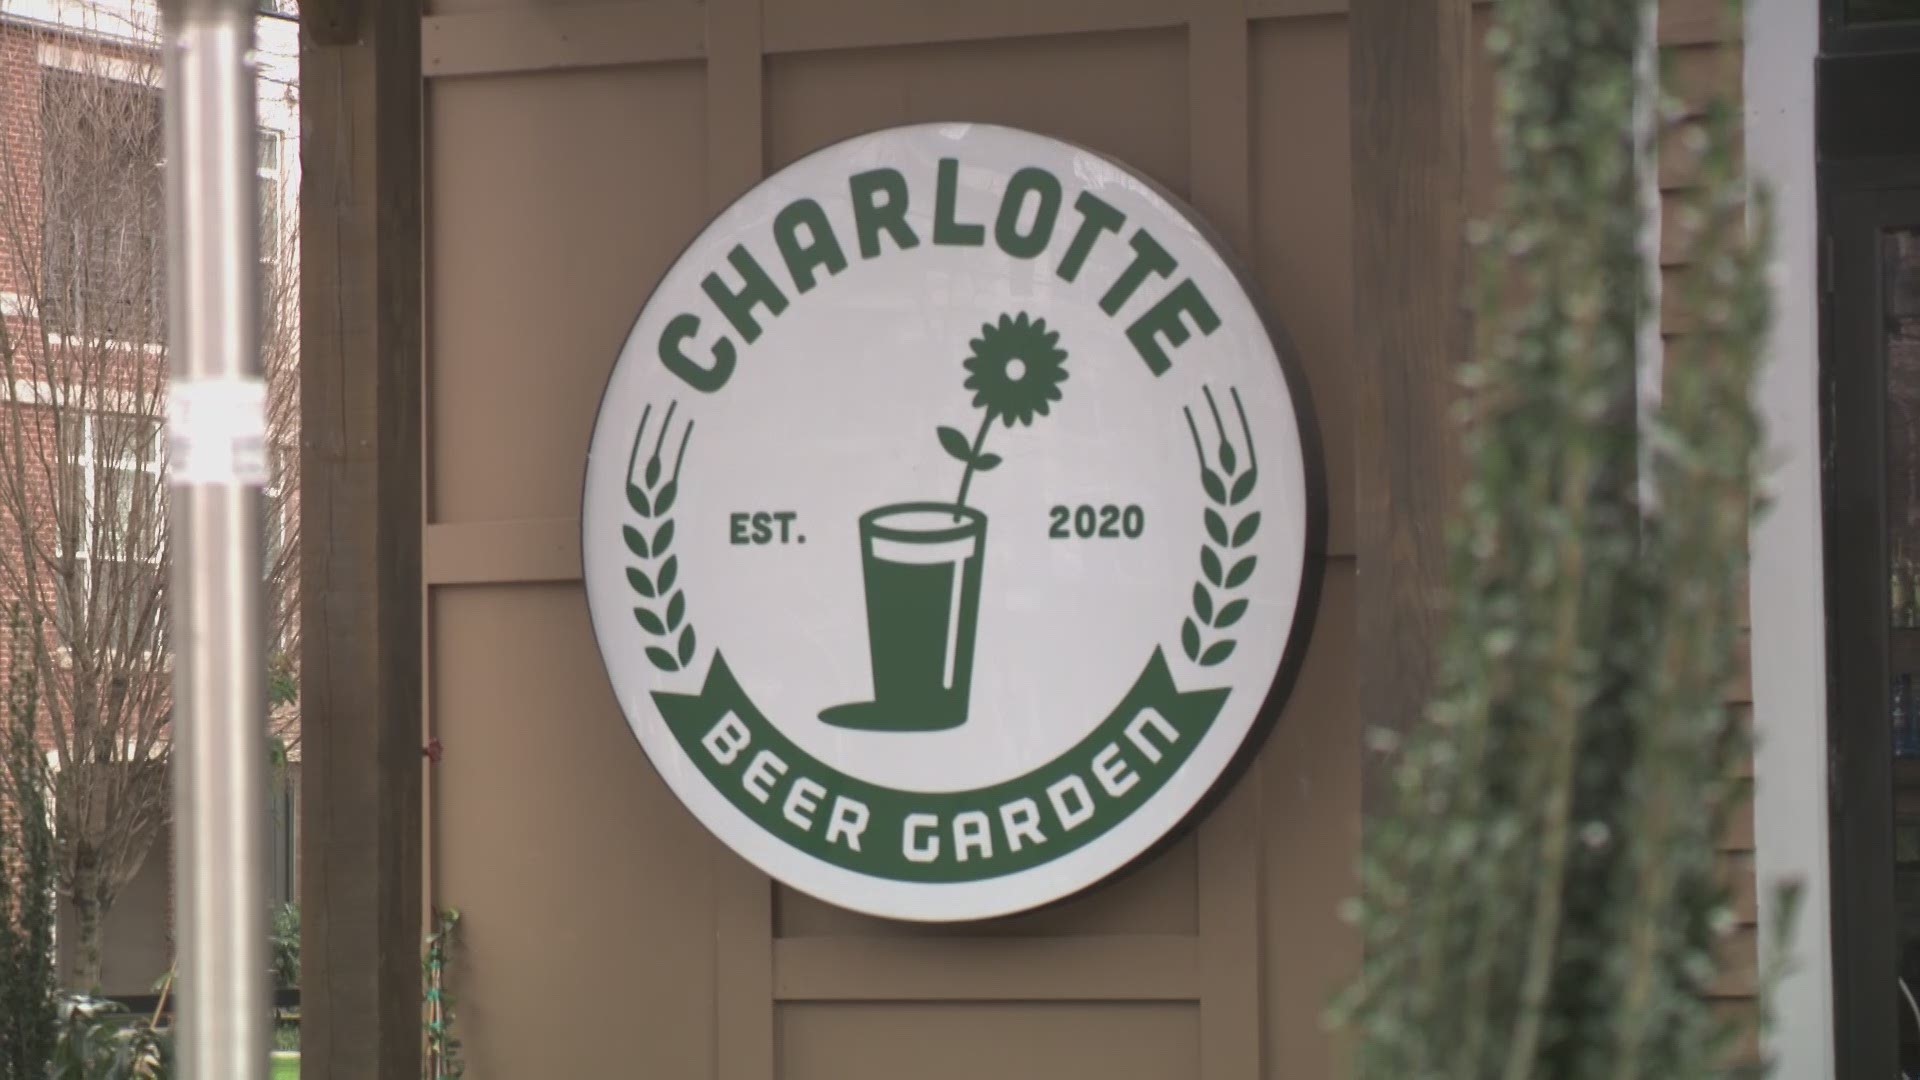 Charlotte Beer Garden is touted as having the largest selection of draft beers available in one restaurant.